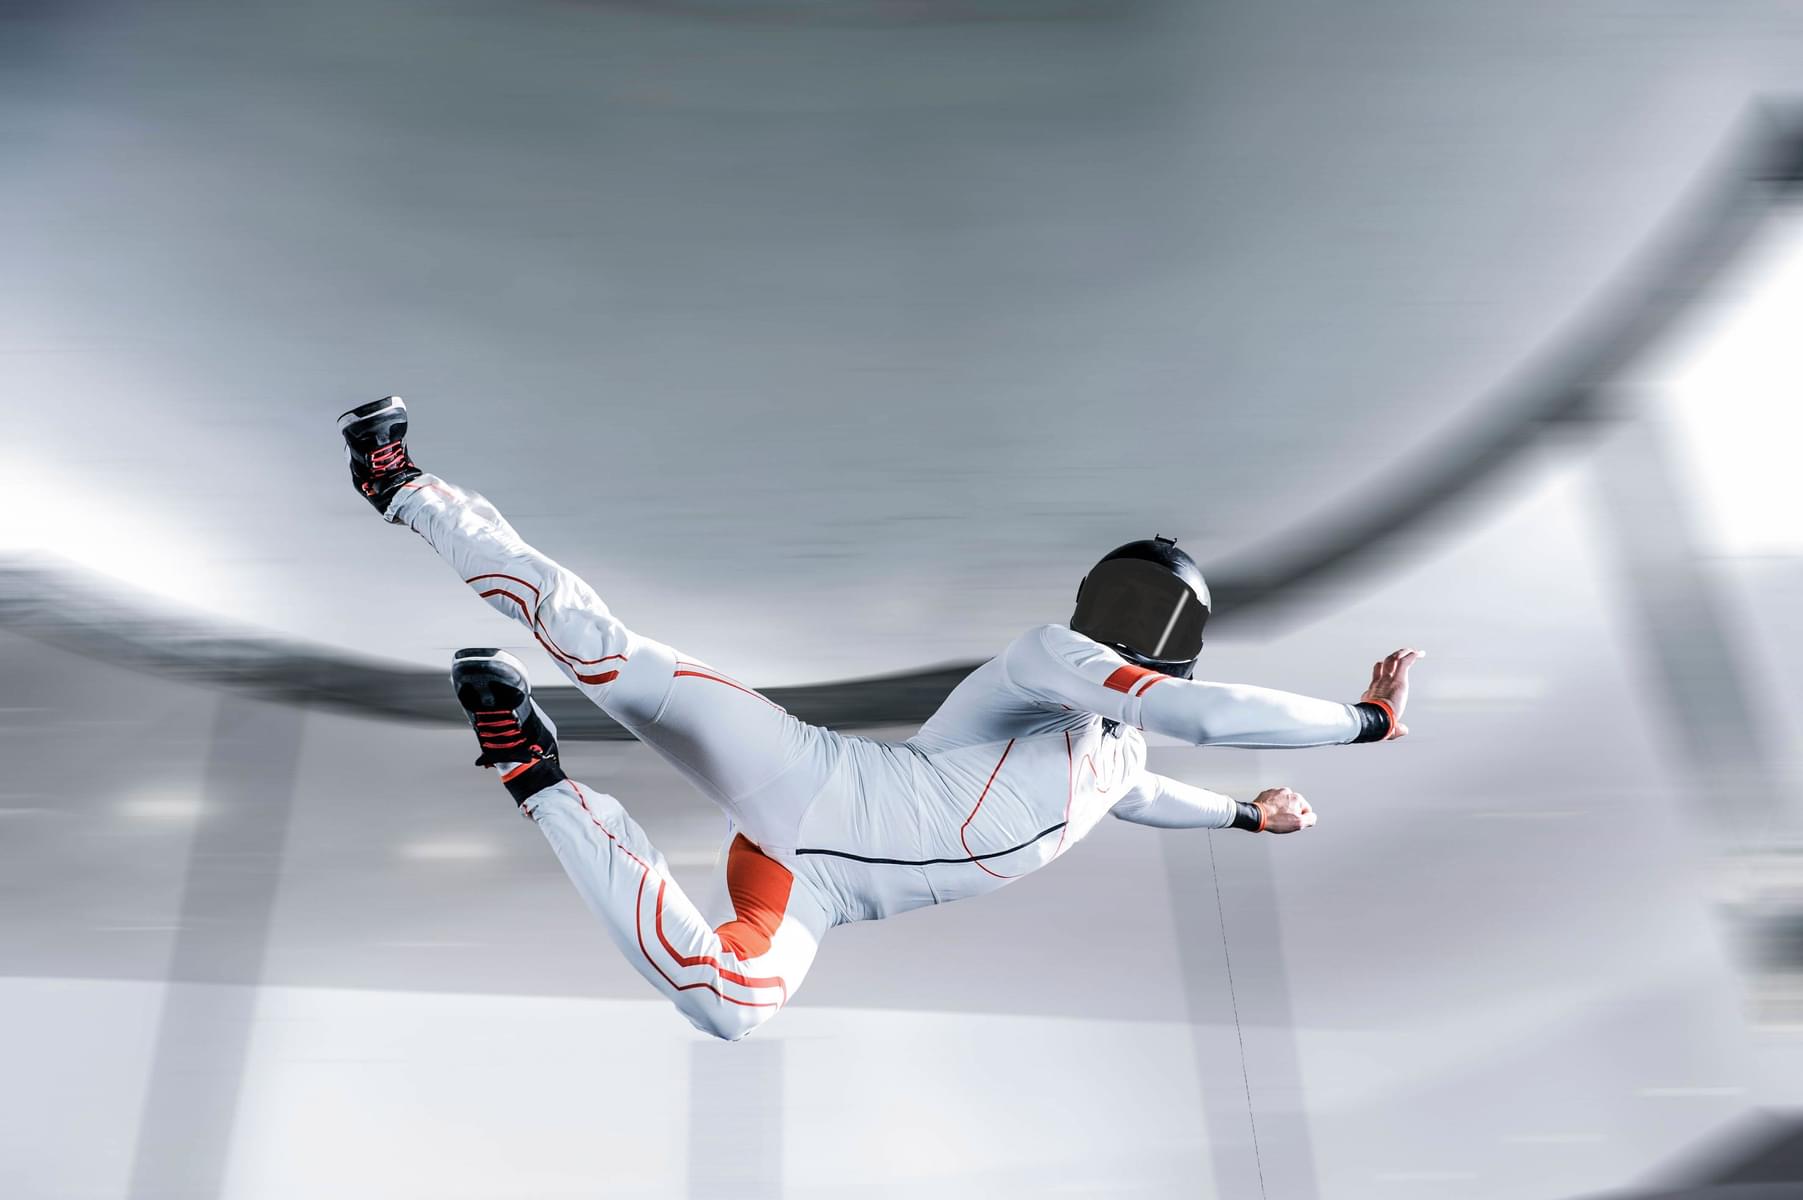 Experience Indoor Skydiving At Ifly Dubai